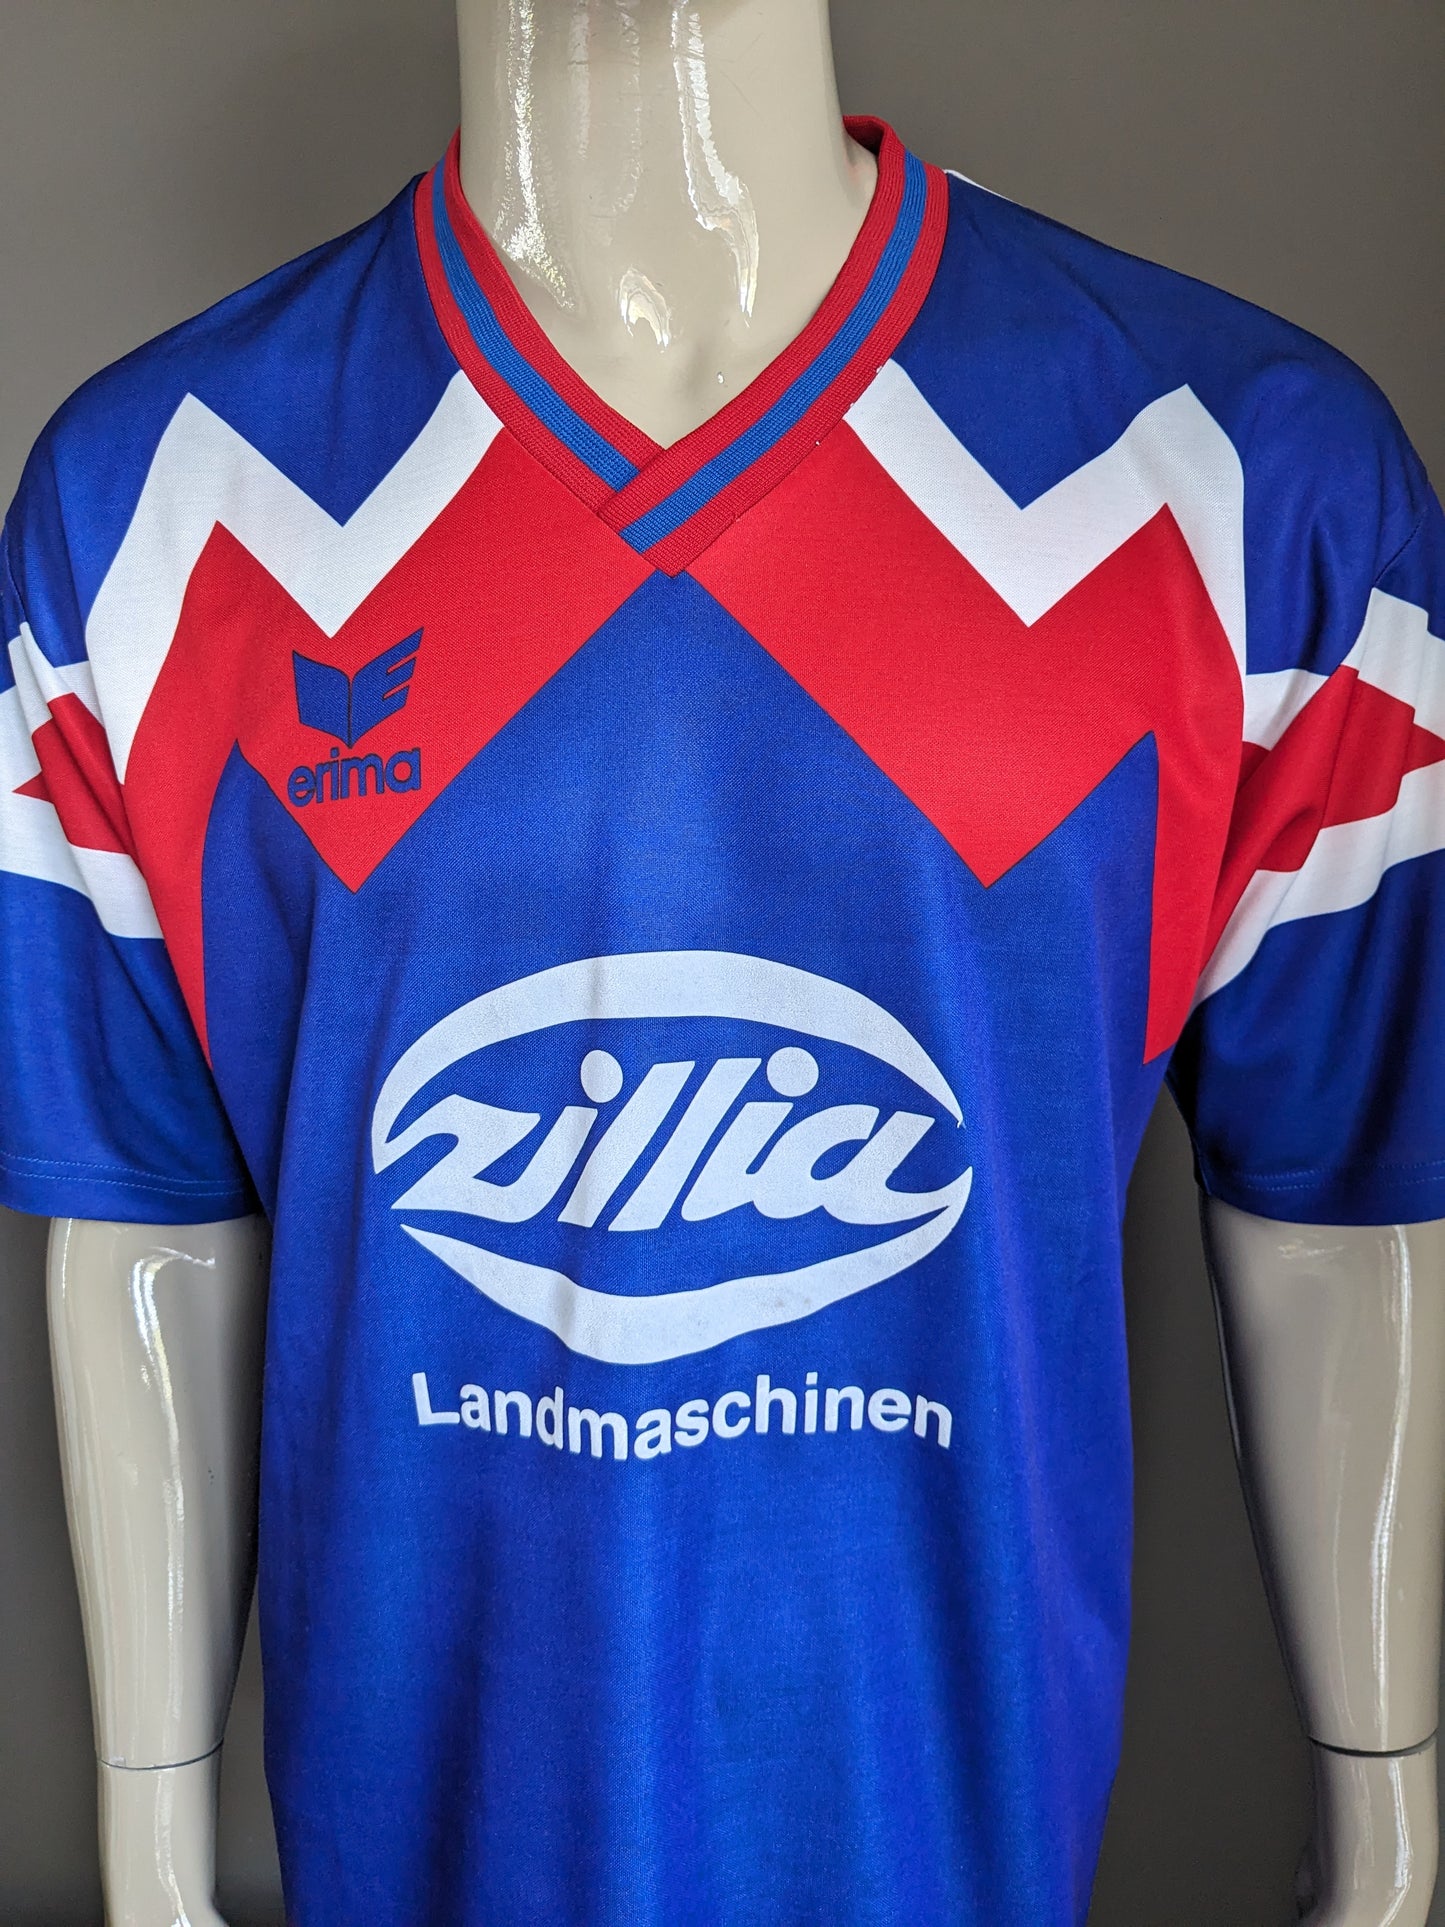 Vintage Erima Sport shirt with V-neck. Red blue white colored. Size XL.